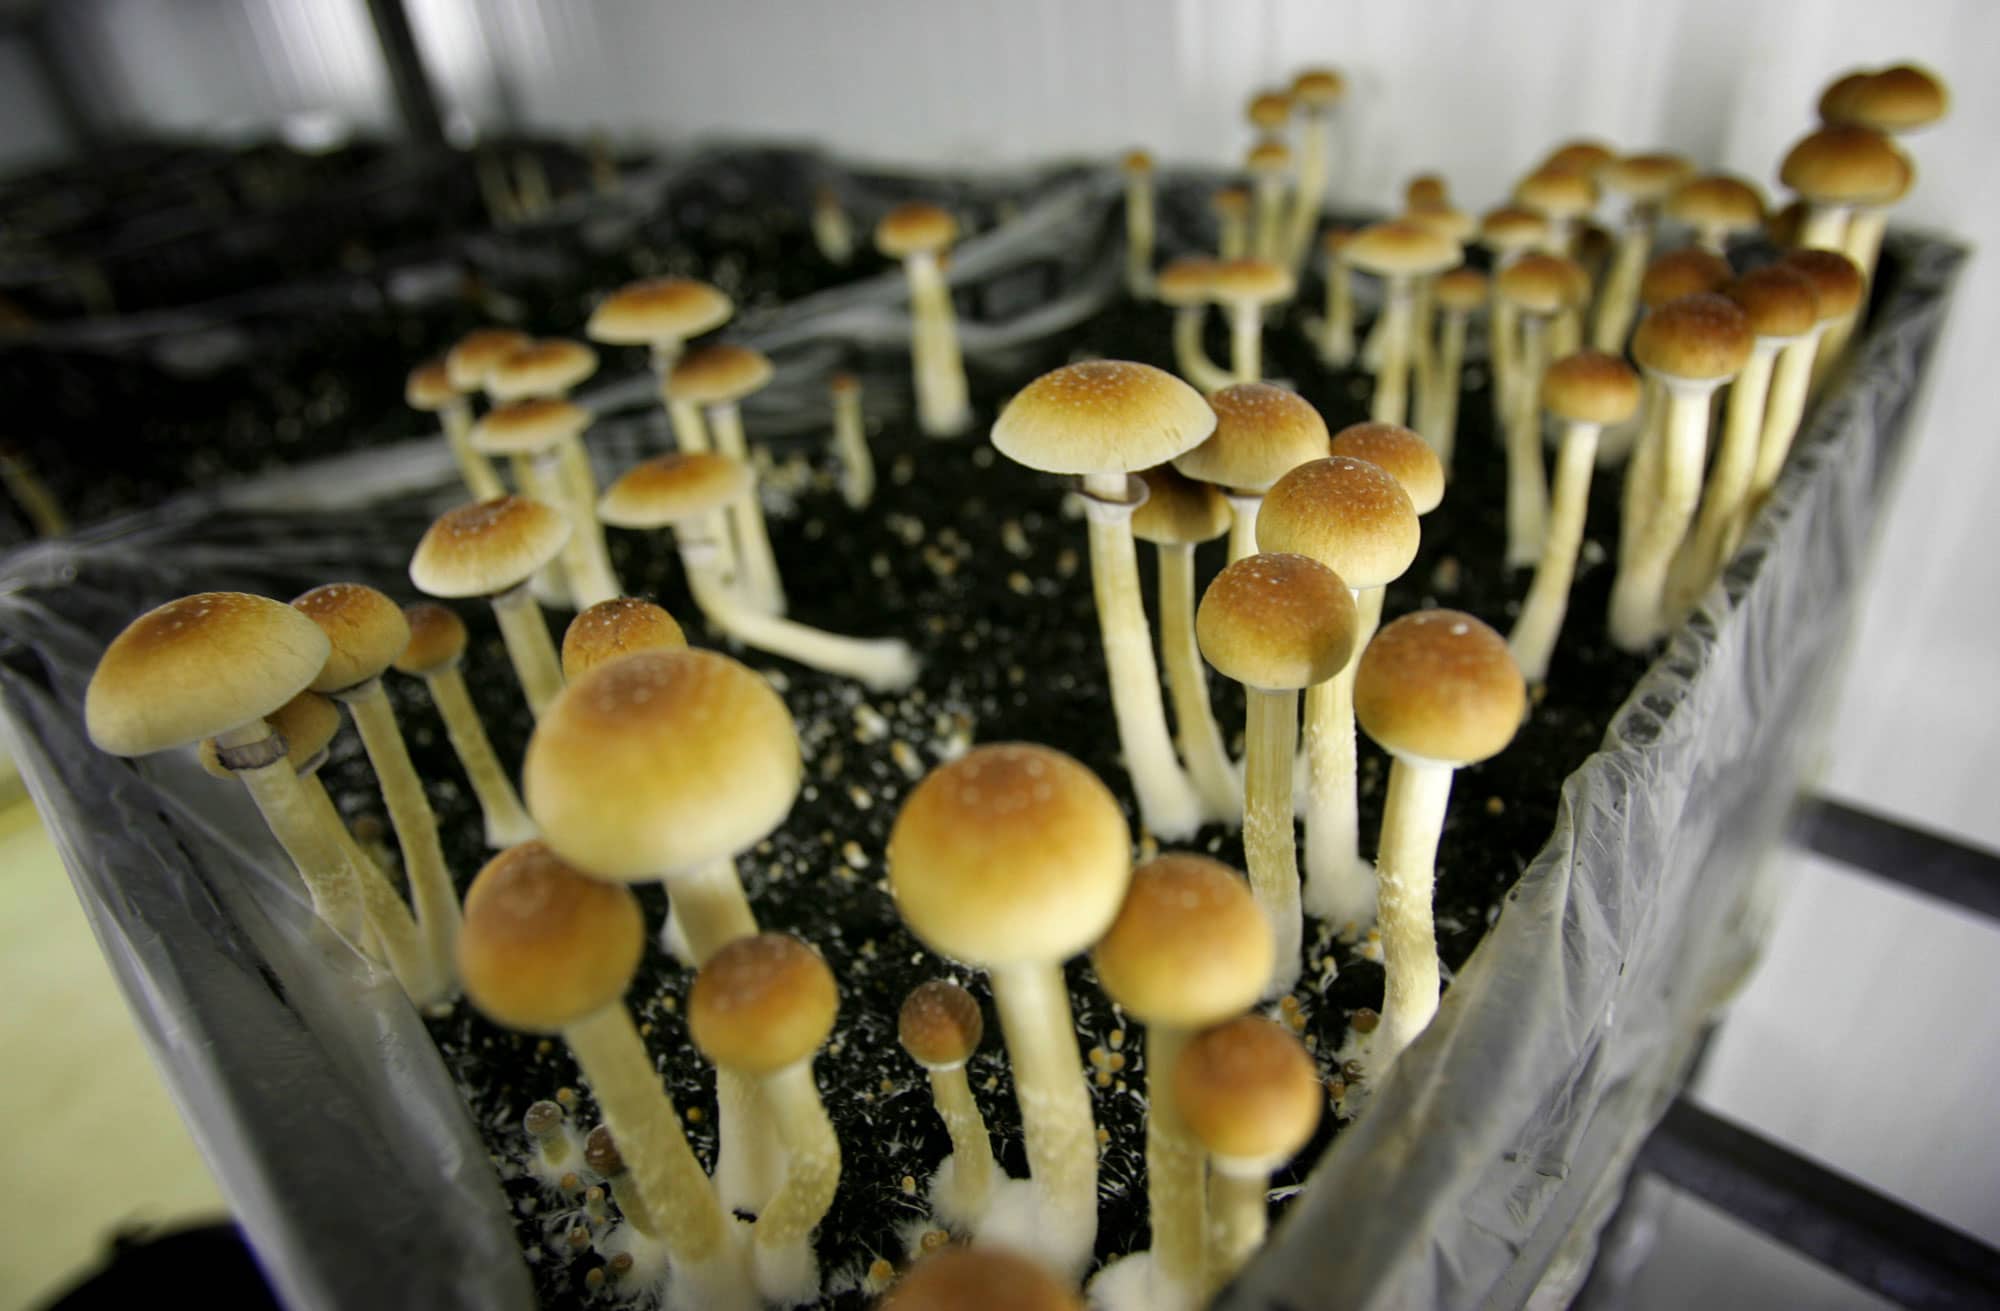 A psychedelic drug boom in mental health treatment comes closer to reality - CNBC